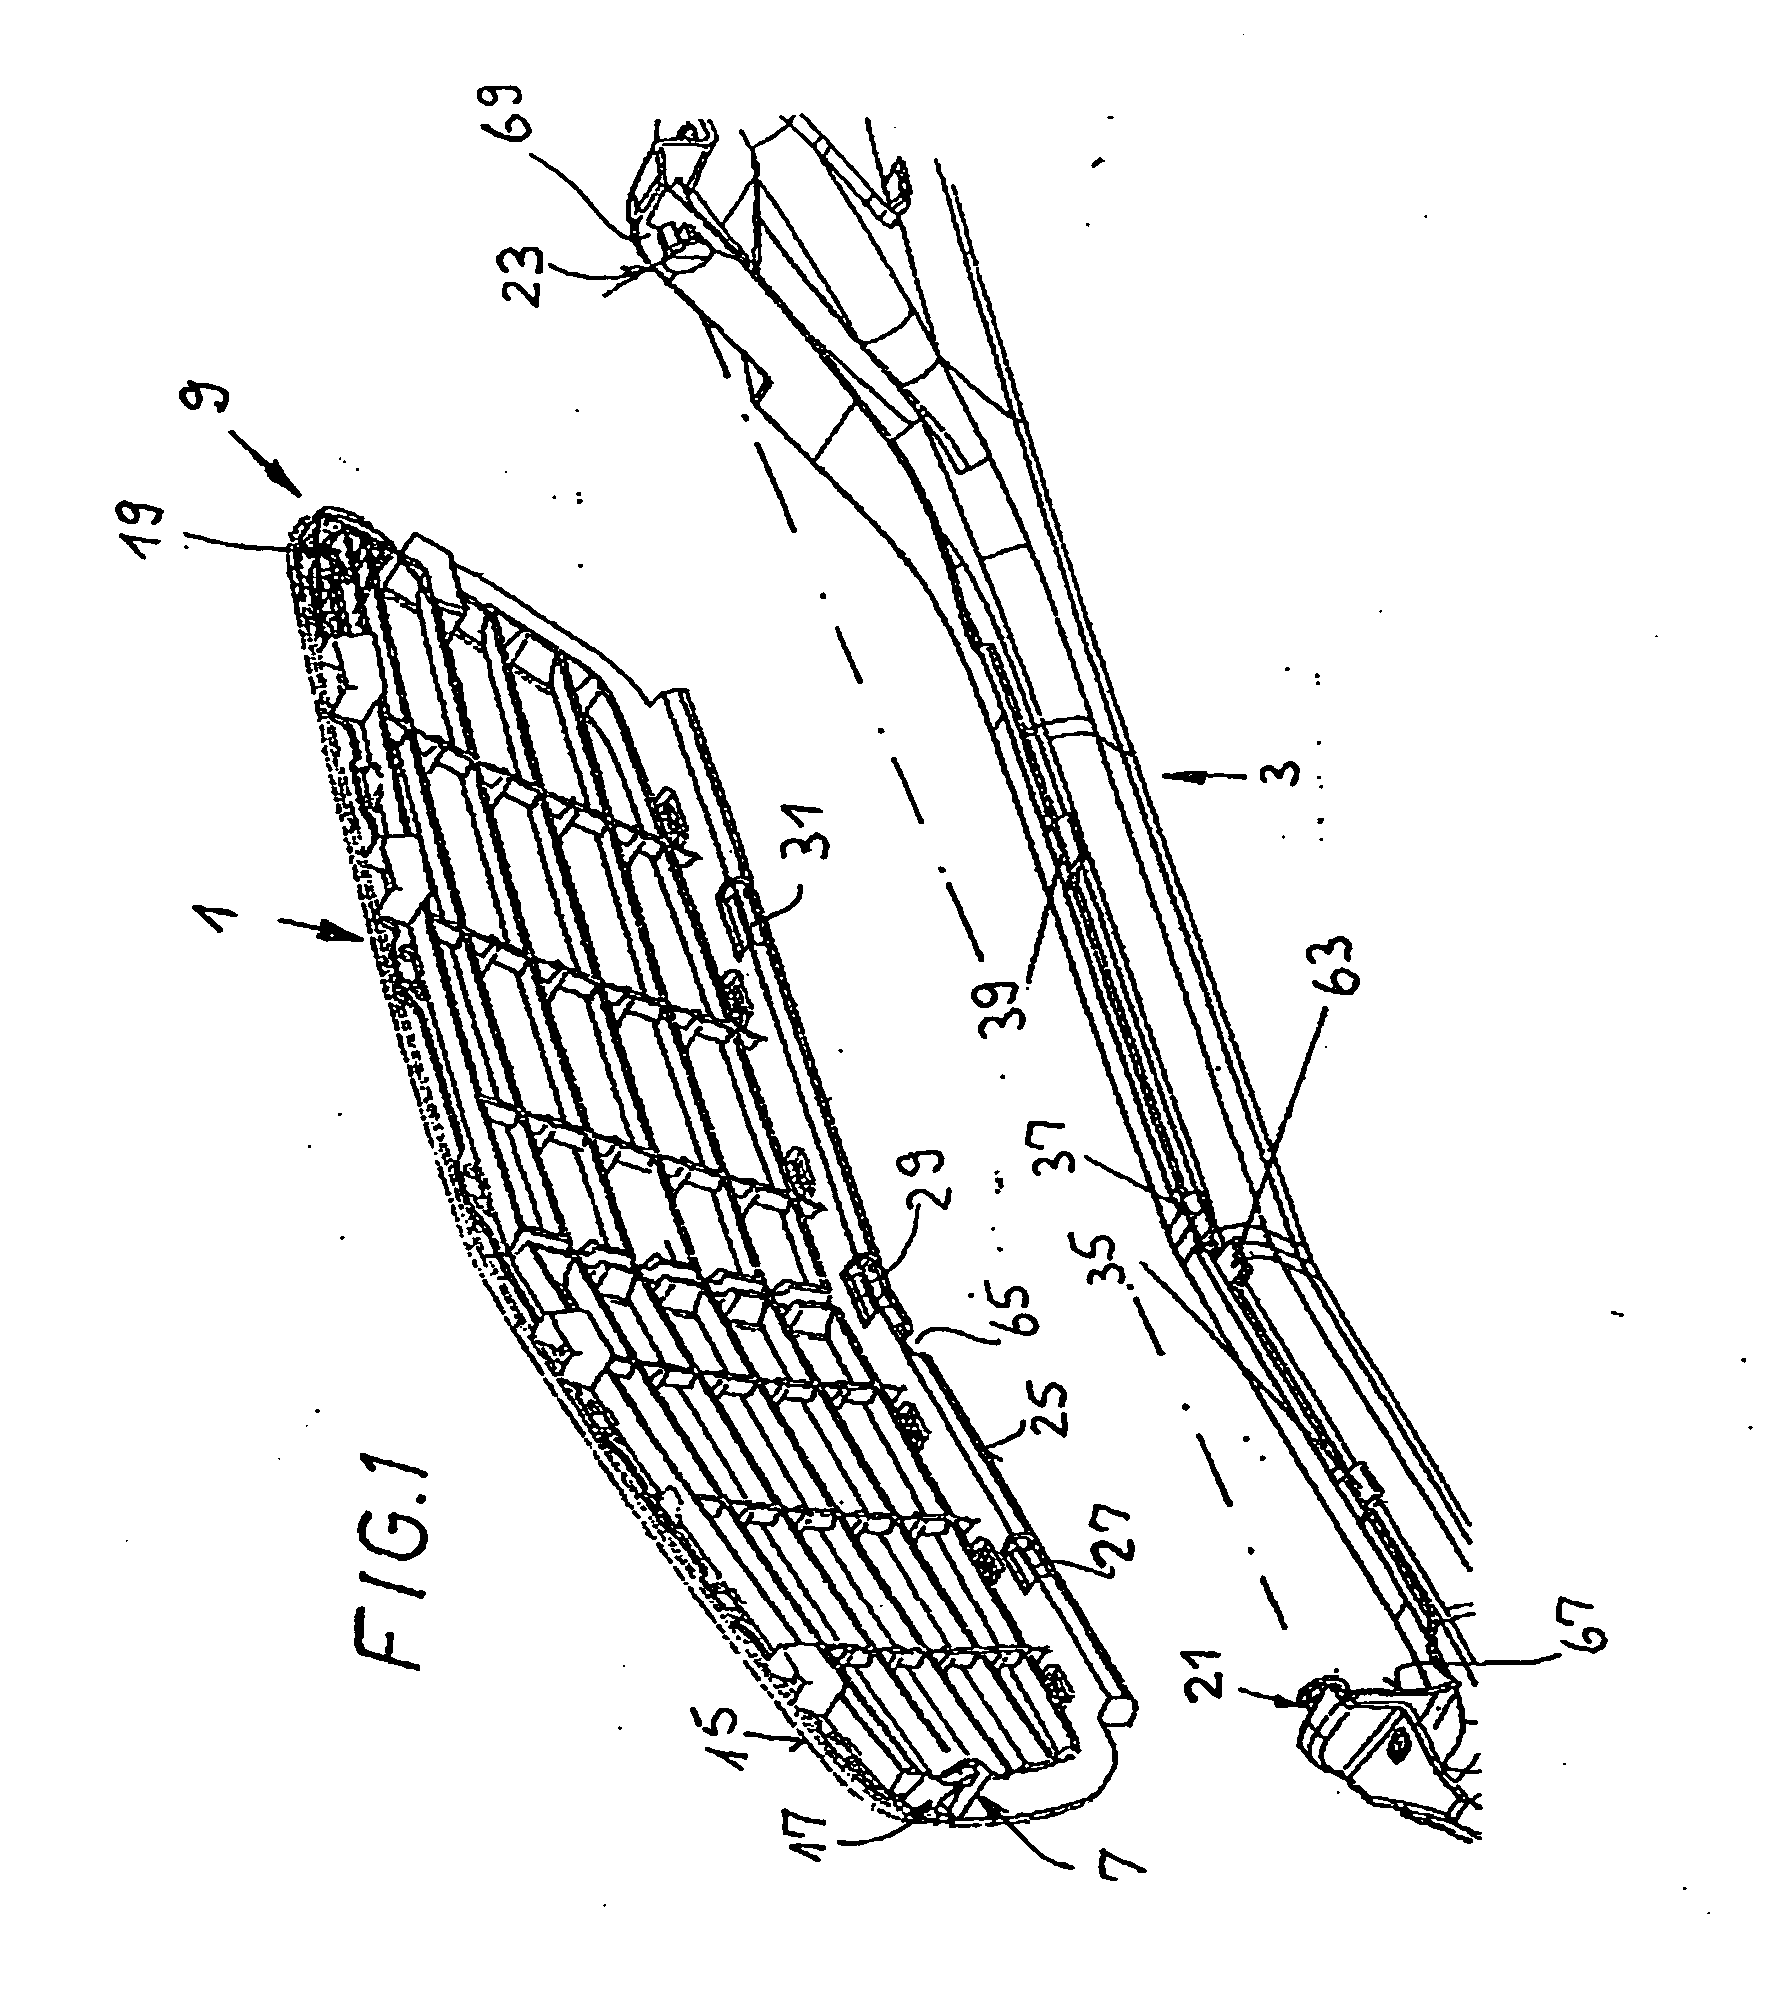 Mounting for a radiator casing in a motor vehicle